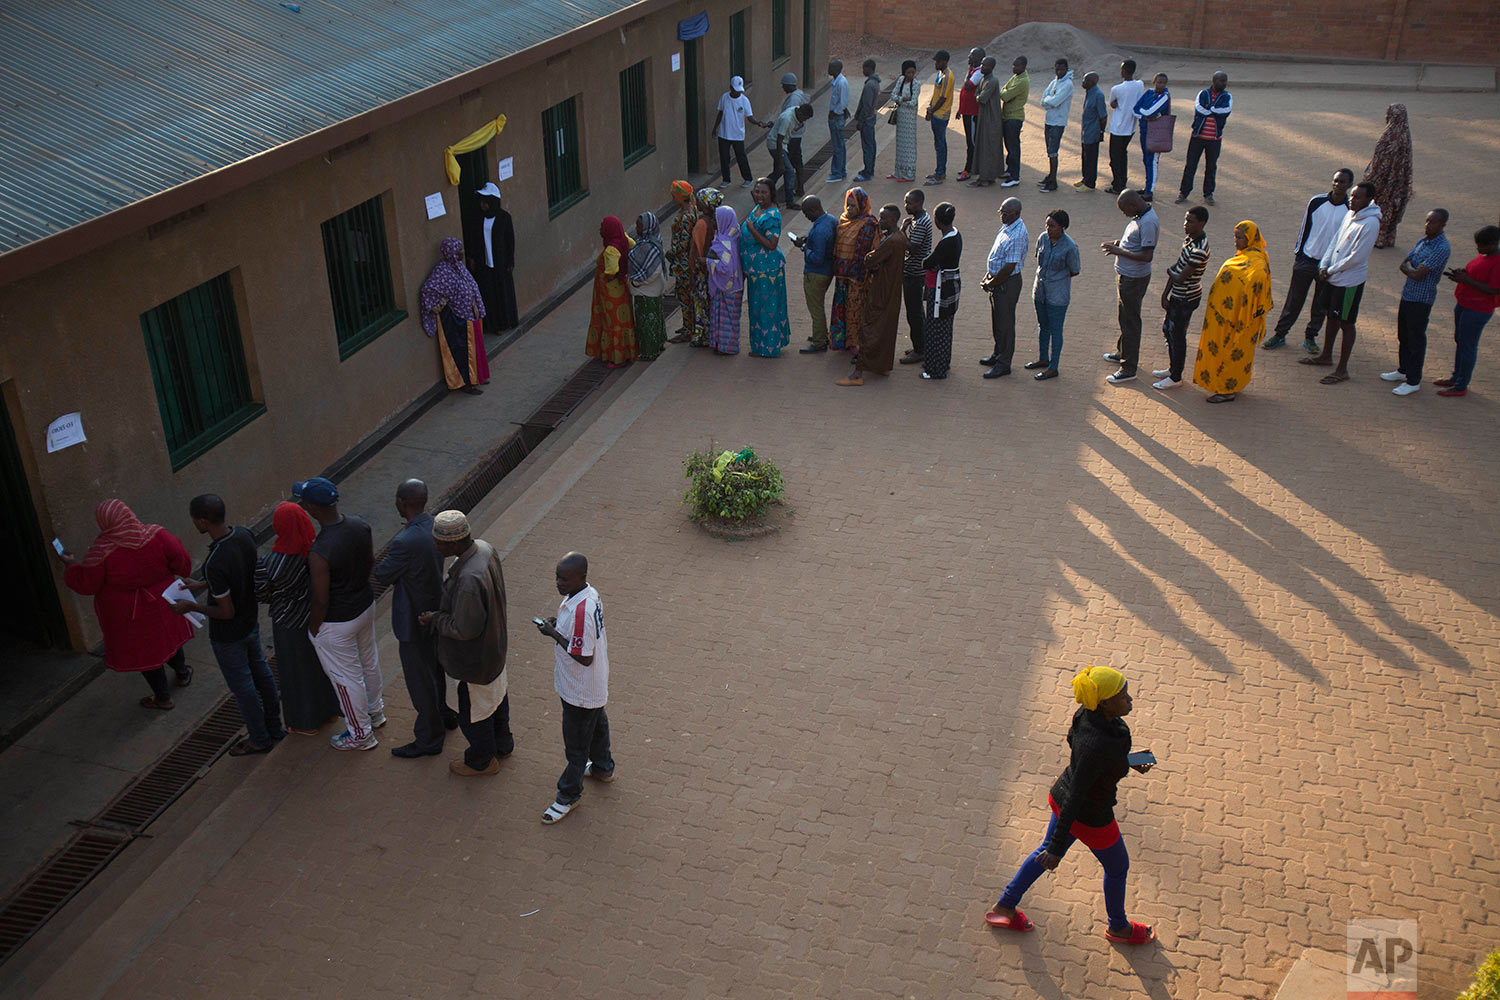  Rwandans line up to cast their vote for the presidential elections at a polling station in Rwanda's capital Kigali Friday, Aug. 4, 2017. Outgoing President Paul Kagame is widely expected to win another term after the government disqualified all but 